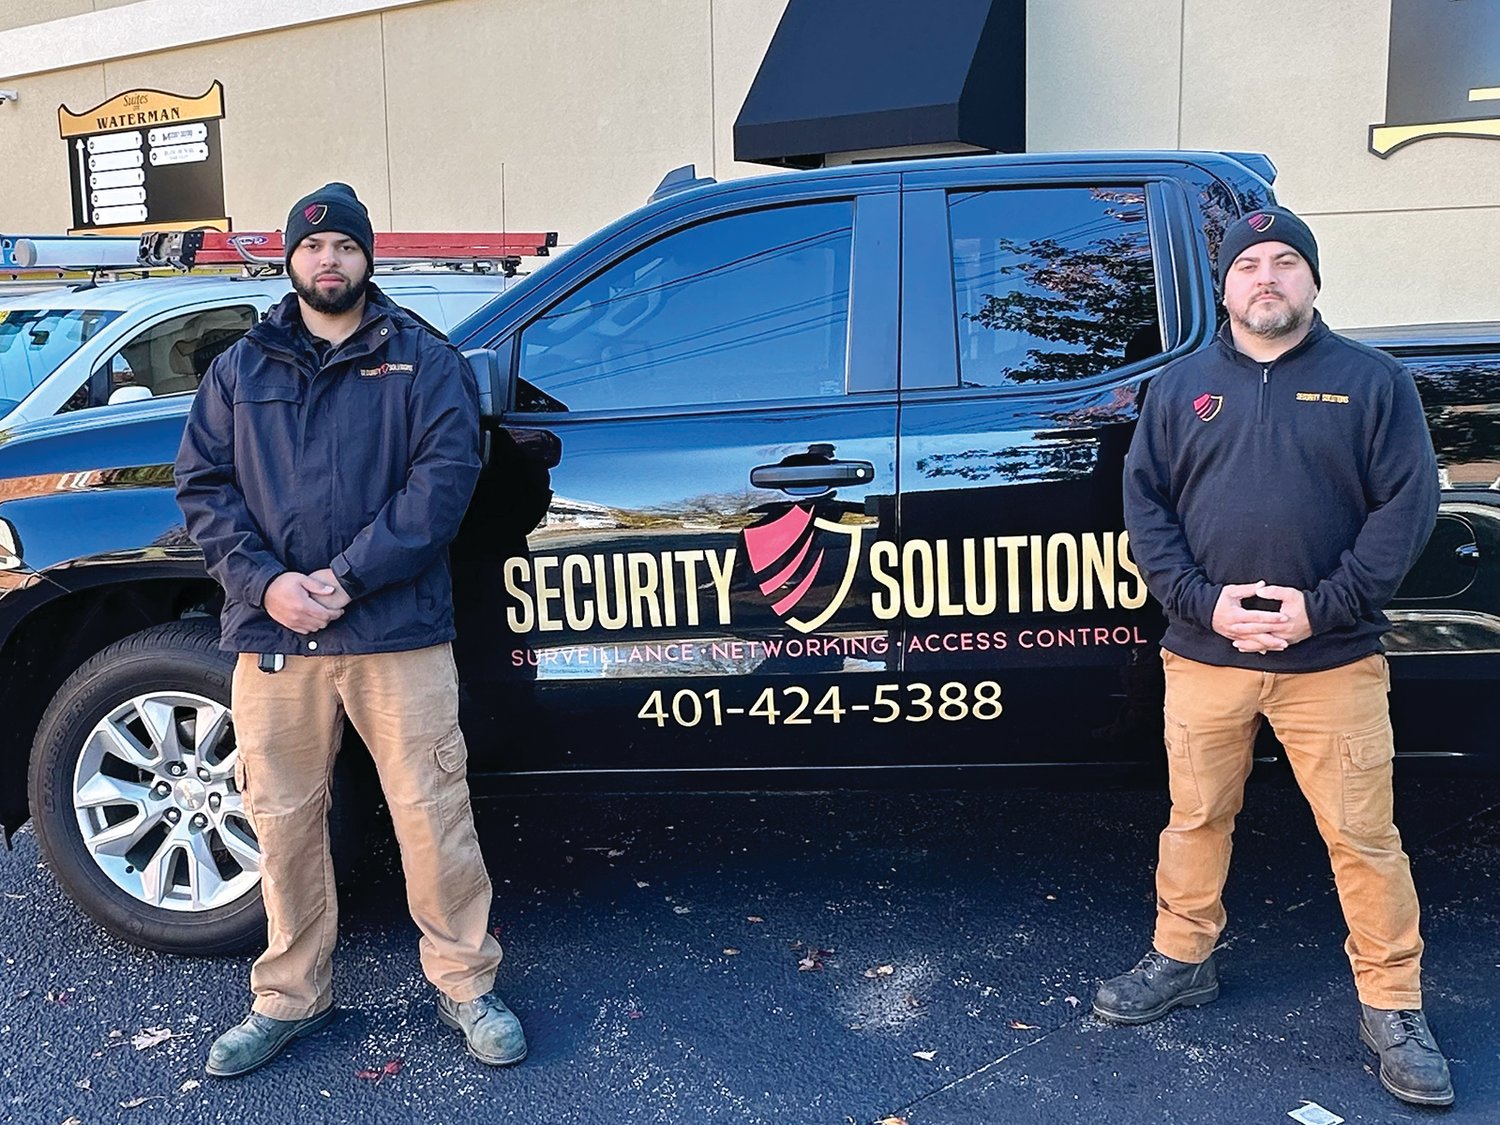 Two of Security Solutions highly trained and hand-selected technicians will install your security system in a timely, professional, and efficient manner ~ with the best result being peace of mind.  Visit www.kmss-us.com for more information.